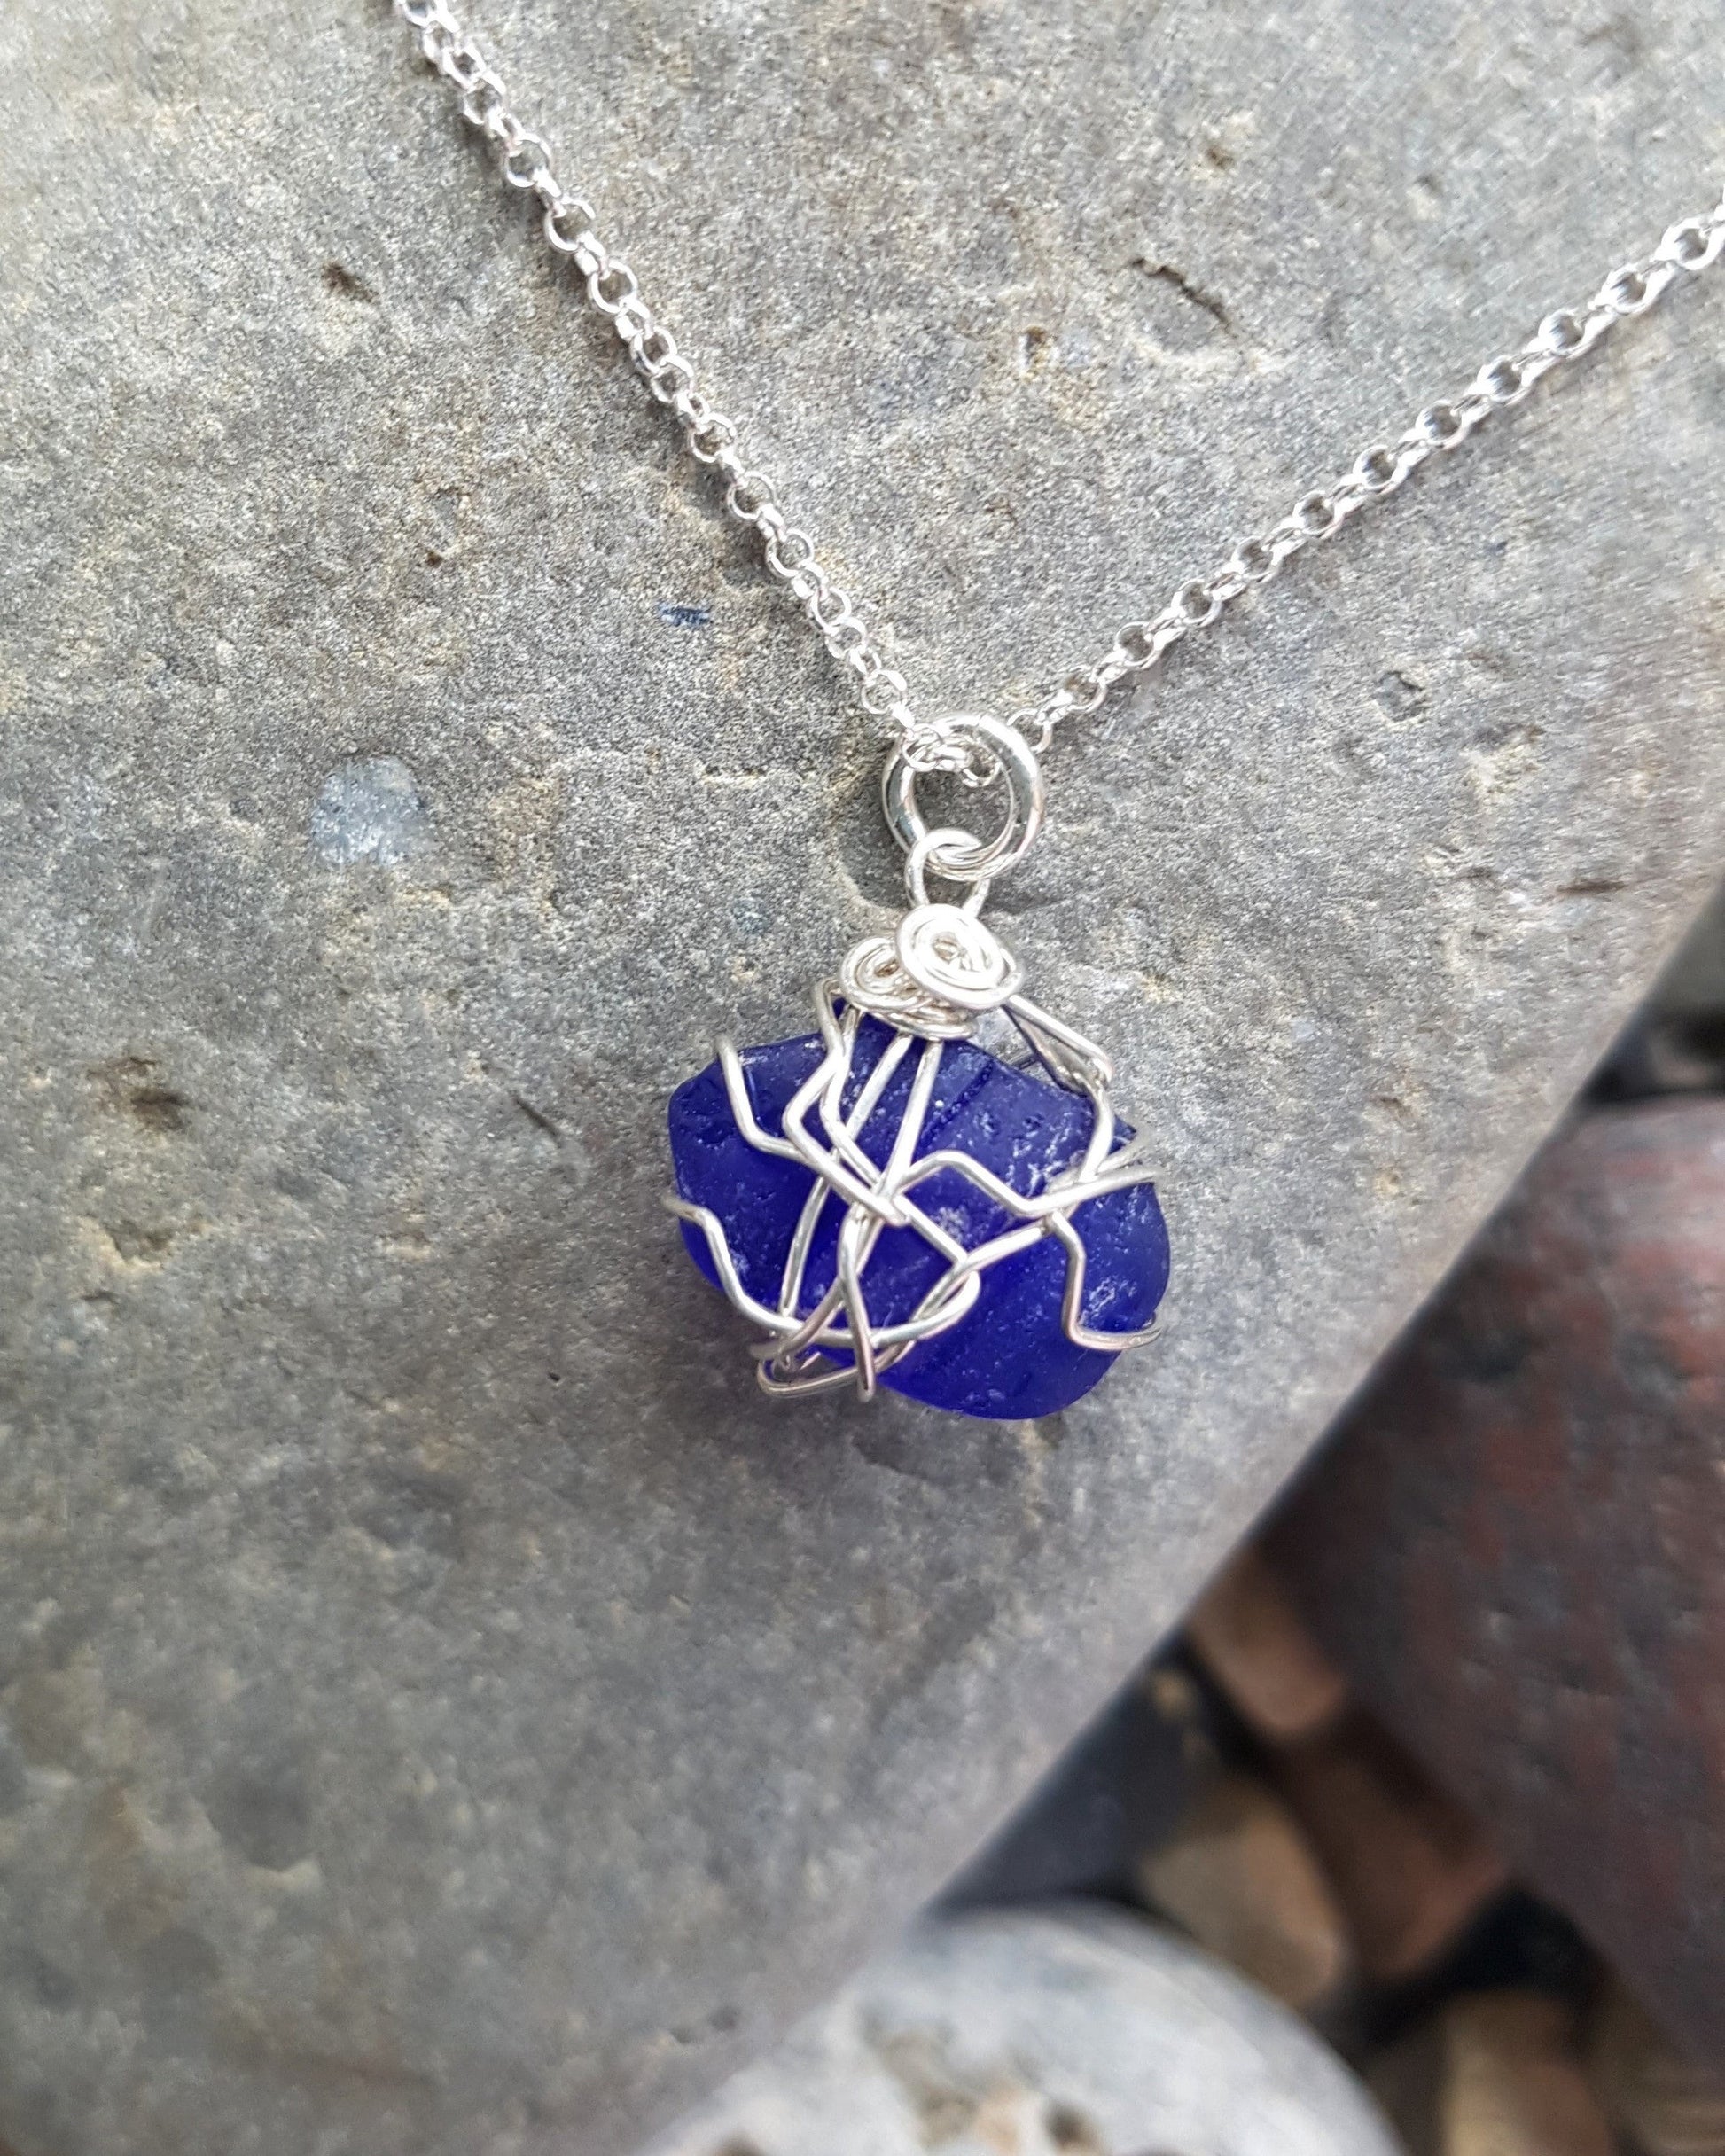 Blue Passion Sea Glass, Lake Glass-Bach GlassSapphire Blue Passion Beach Glass Pendant Necklace, Sterling Silver wire wrapped blue beach glass pendant on rolo style chain. Displayed on grey rock.